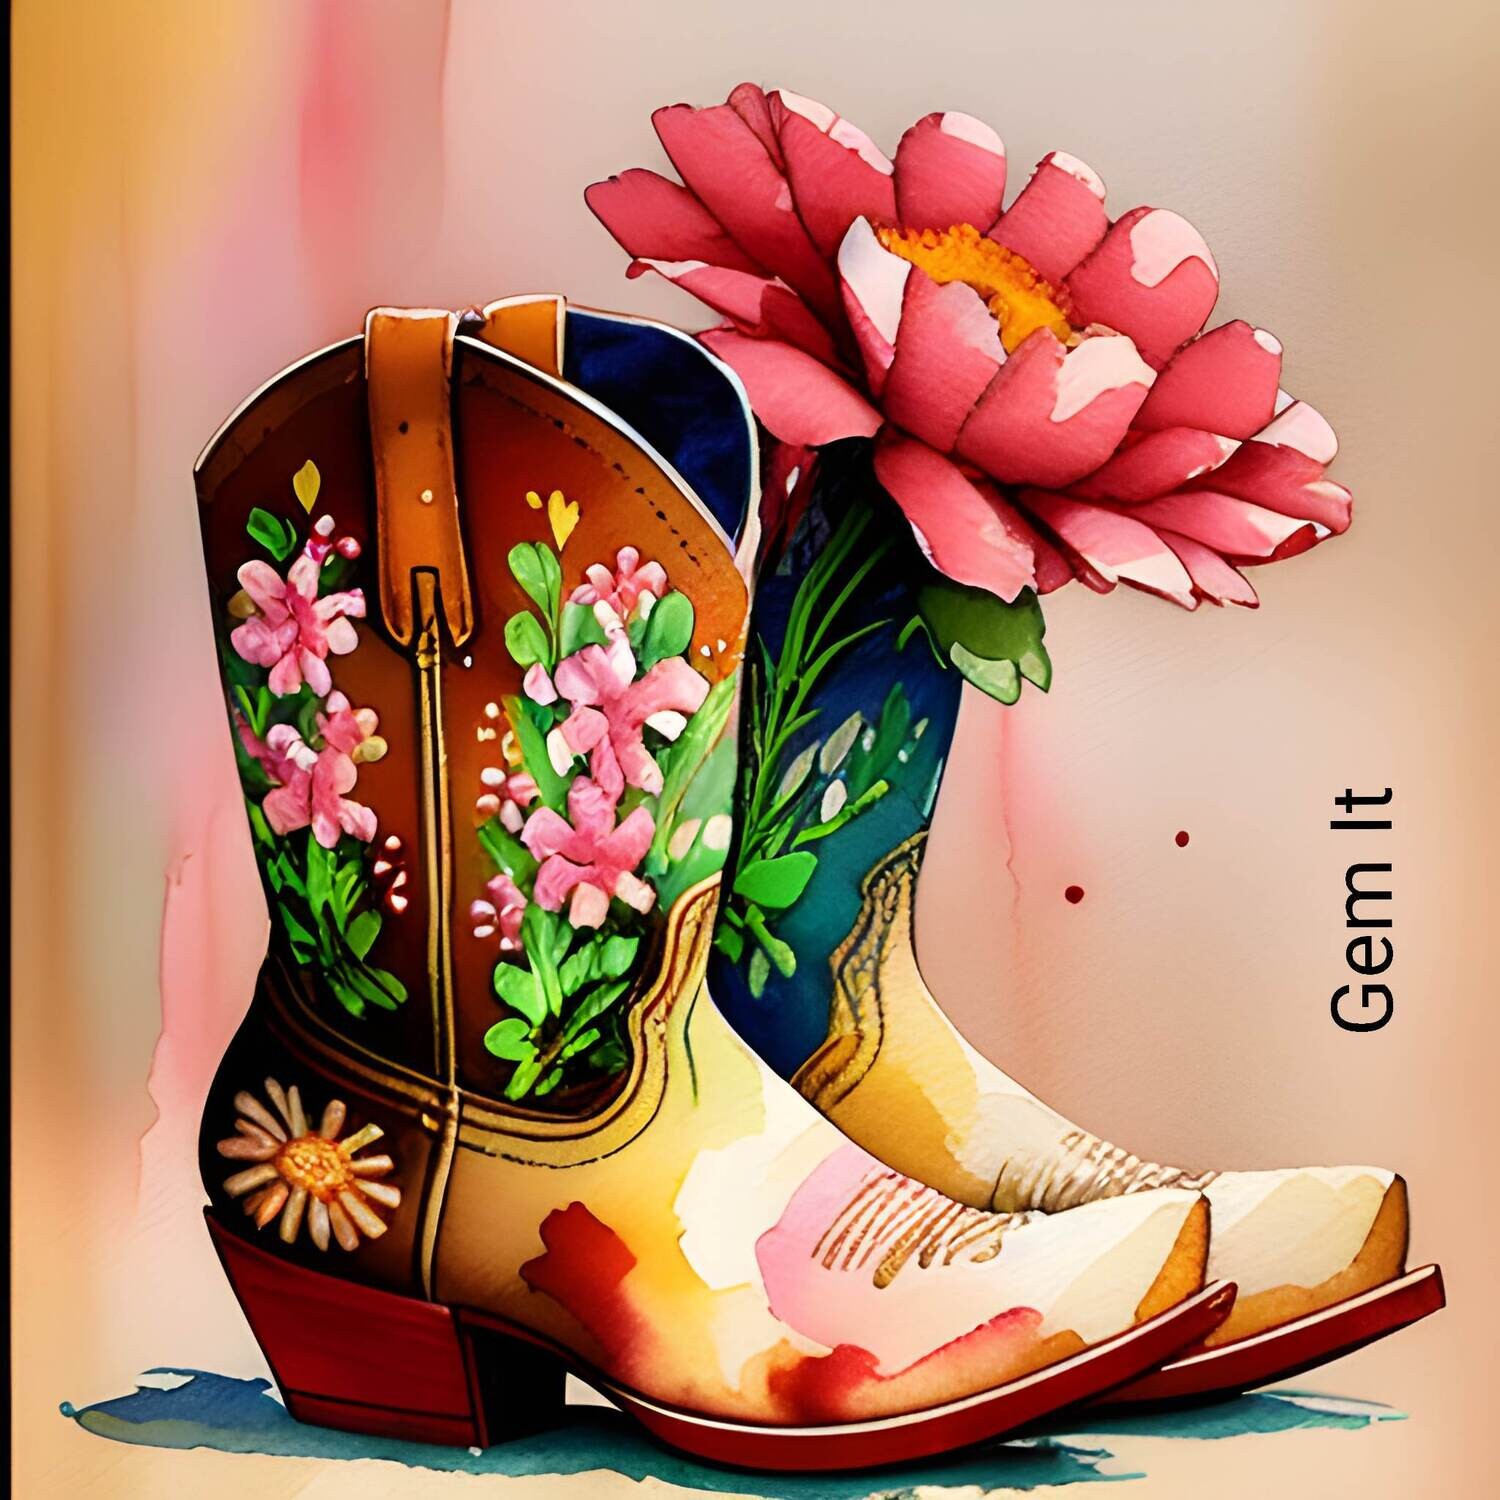 Cowgirl Boots 2 - Full Drill Diamond Painting - Specially ordered for you. Delivery is approximately 4 - 6 weeks.